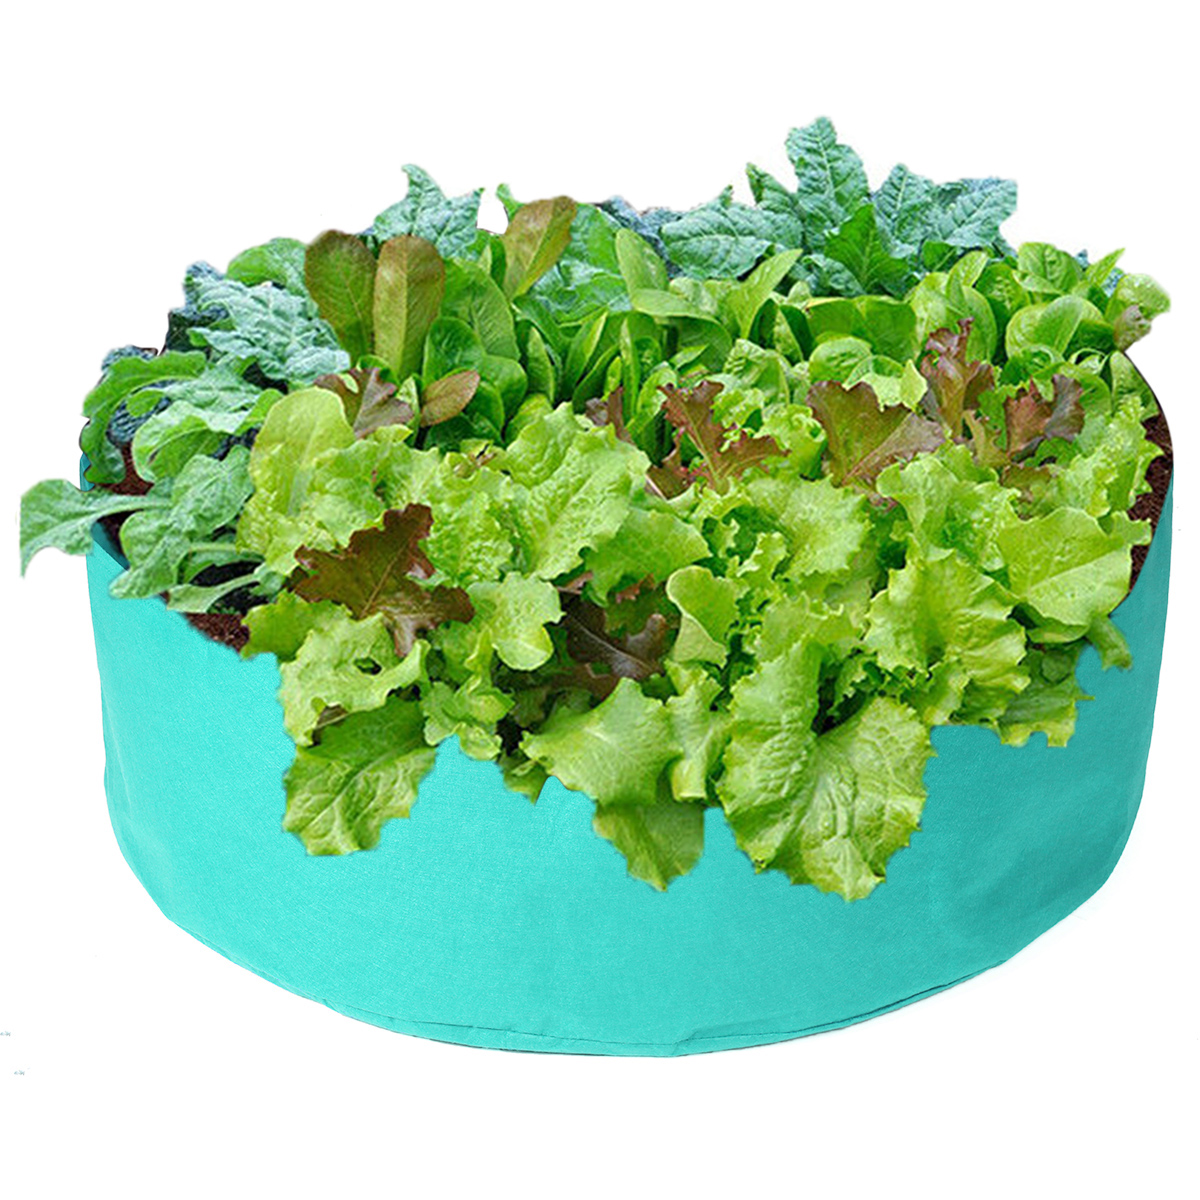 Foldable-Round-Planting-Container-Nursery-Flower-Planter-Vegetable-Flowers-Planting-Grow-Bag-1753373-7